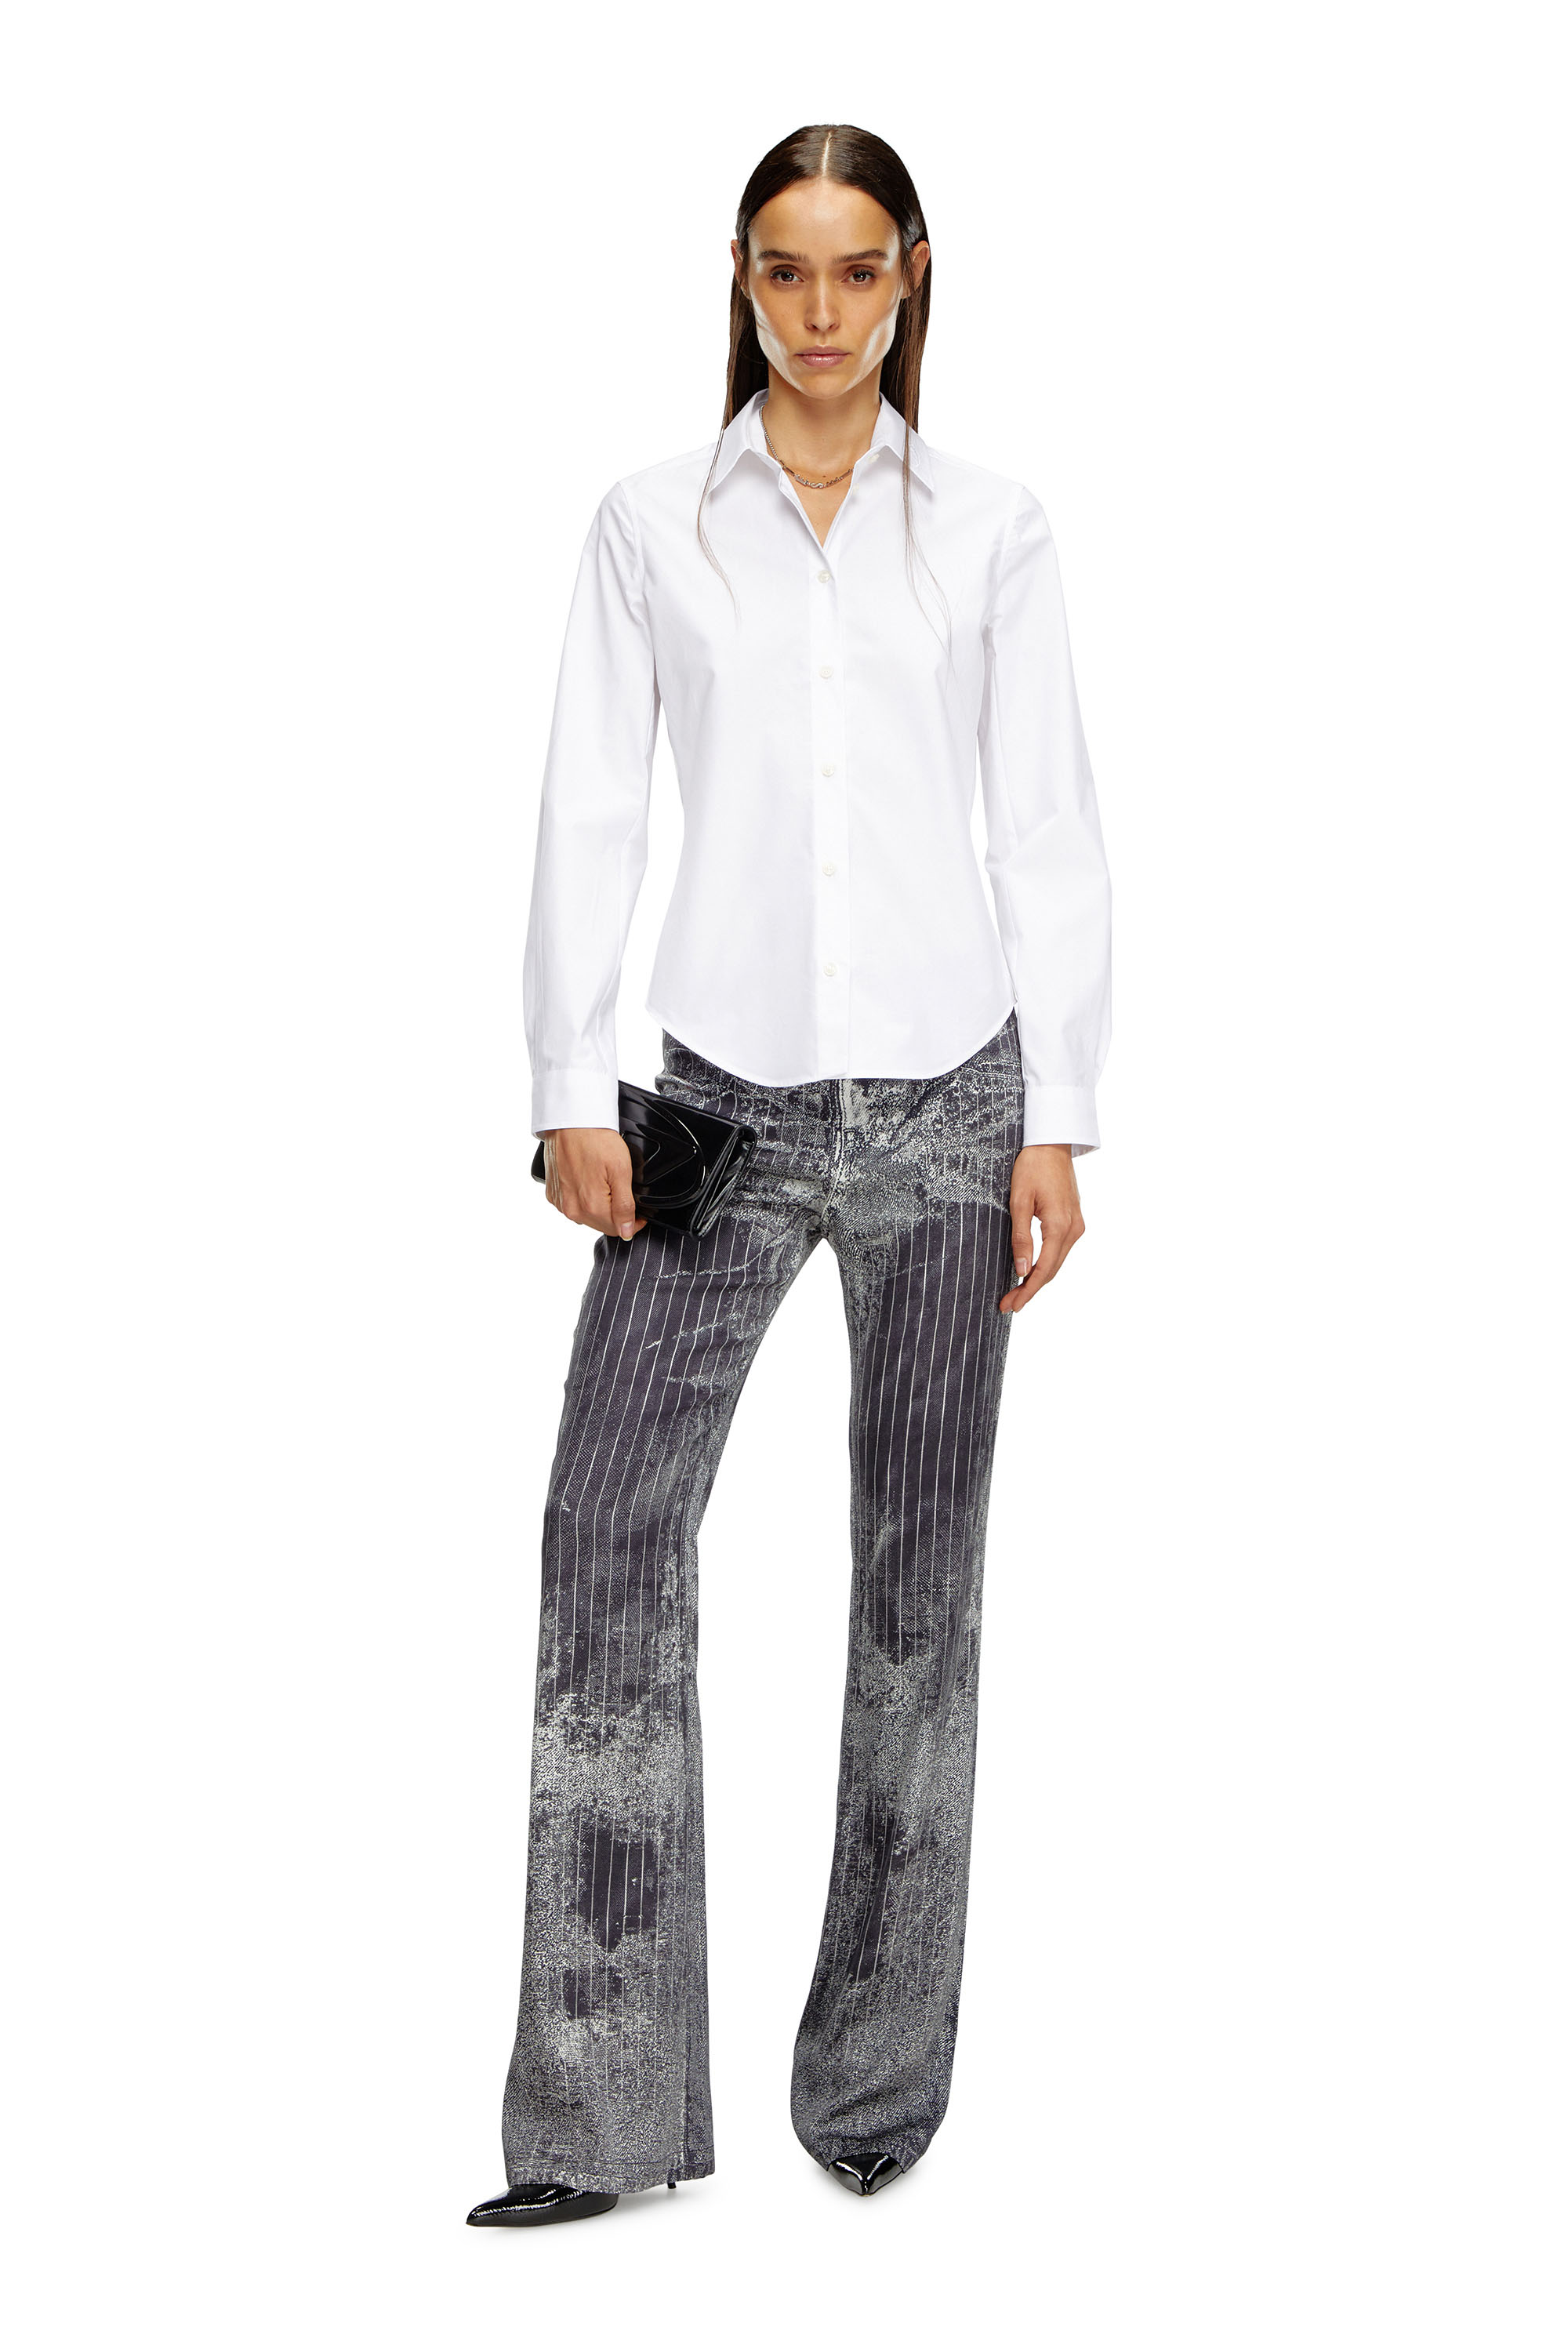 Diesel - C-GISEL-P1, Woman Shirt with logo-embroidered collar in White - Image 4